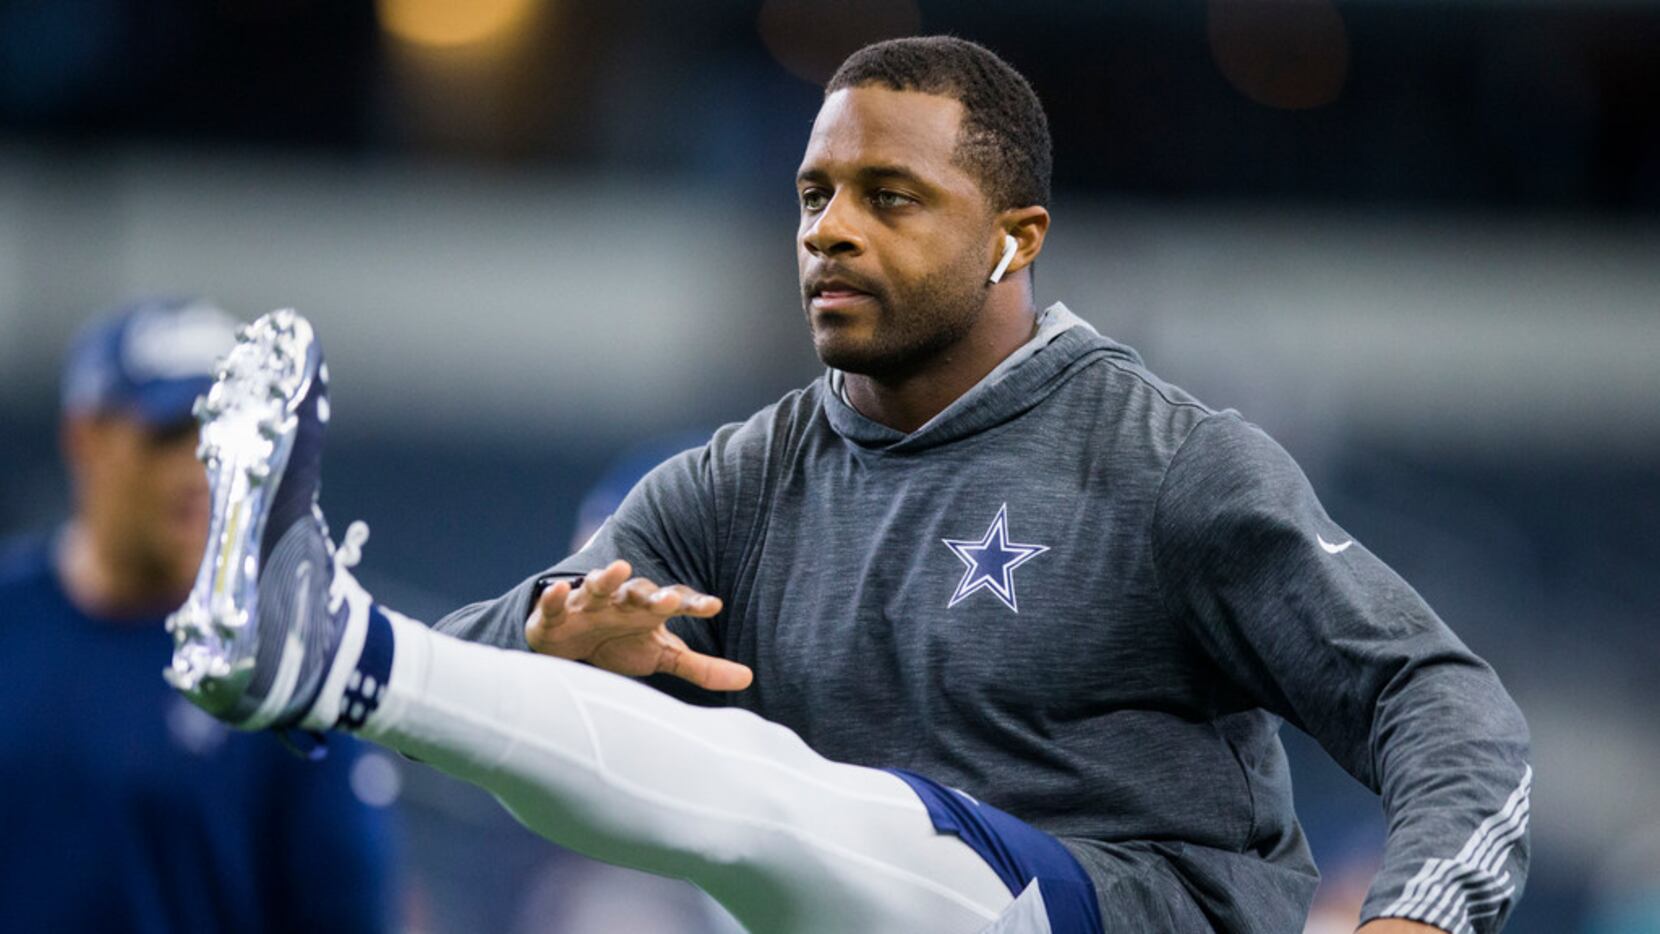 Cowboys WR Randall Cobb ready for opportunity to go against former team